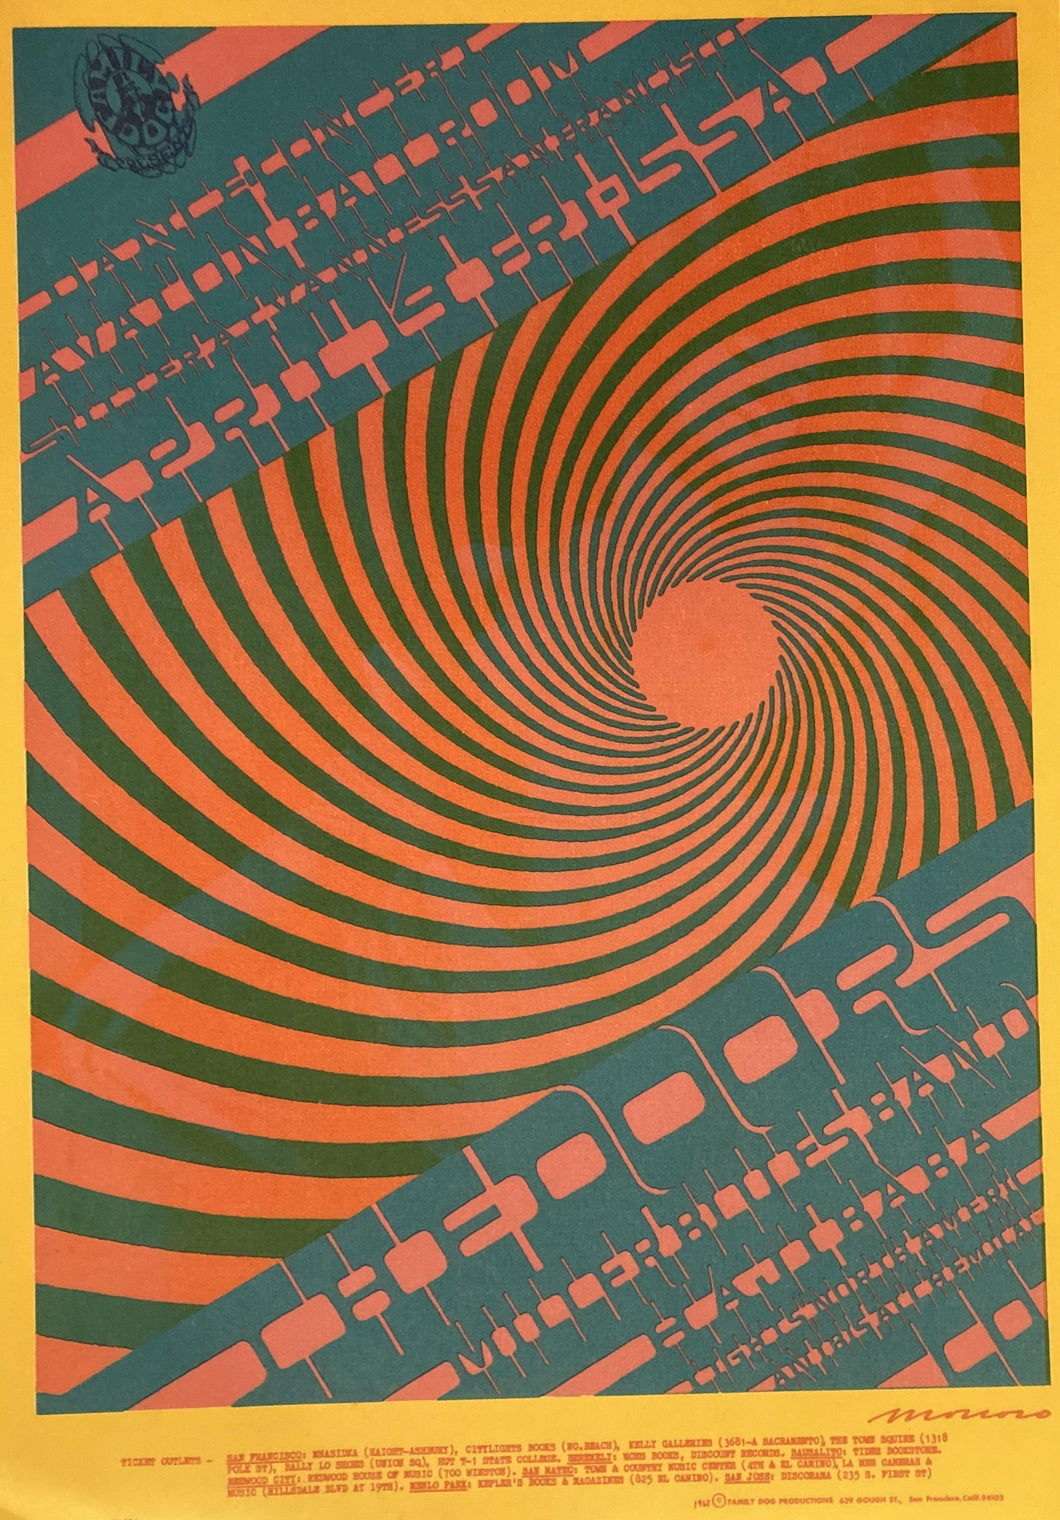 The Doors poster - Live at the Avalon Ballroom USA with Steve Miller 1967 reprinted edition - Original Music and Movie Posters for sale from Bamalama - Online Poster Store UK London